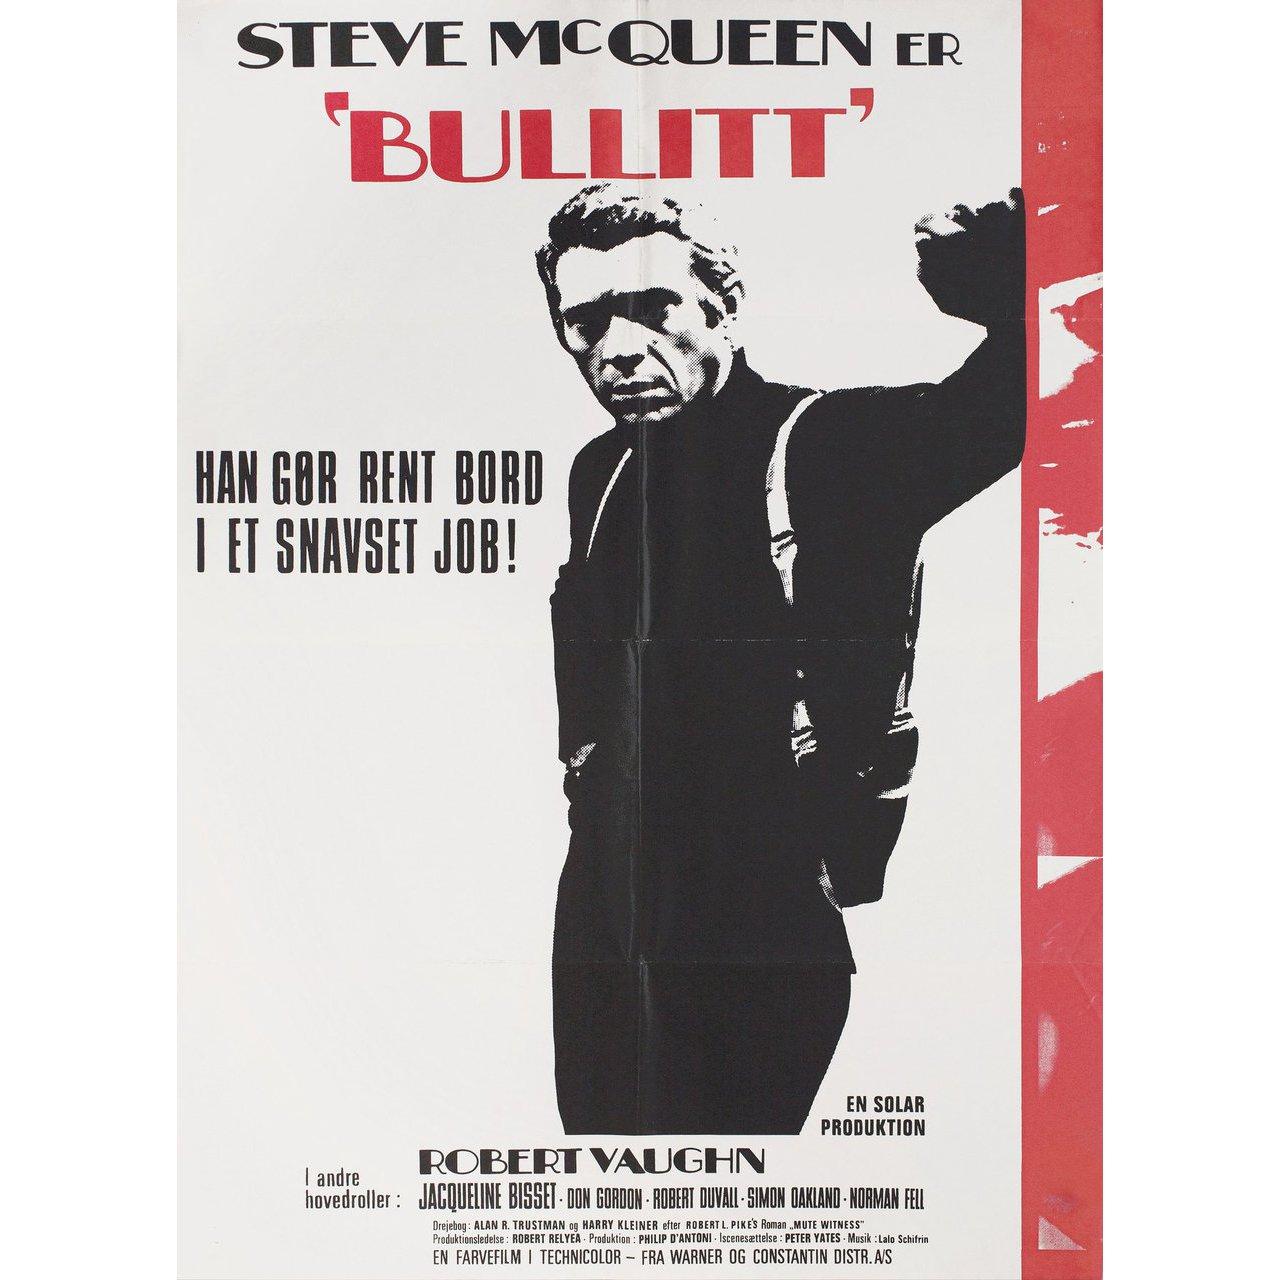 Original 1969 Danish A1 poster for the first Danish theatrical release of the film Bullitt directed by Peter Yates with Steve McQueen / Jacqueline Bisset / Robert Vaughn / Don Gordon. Fine condition, folded. Many original posters were issued folded